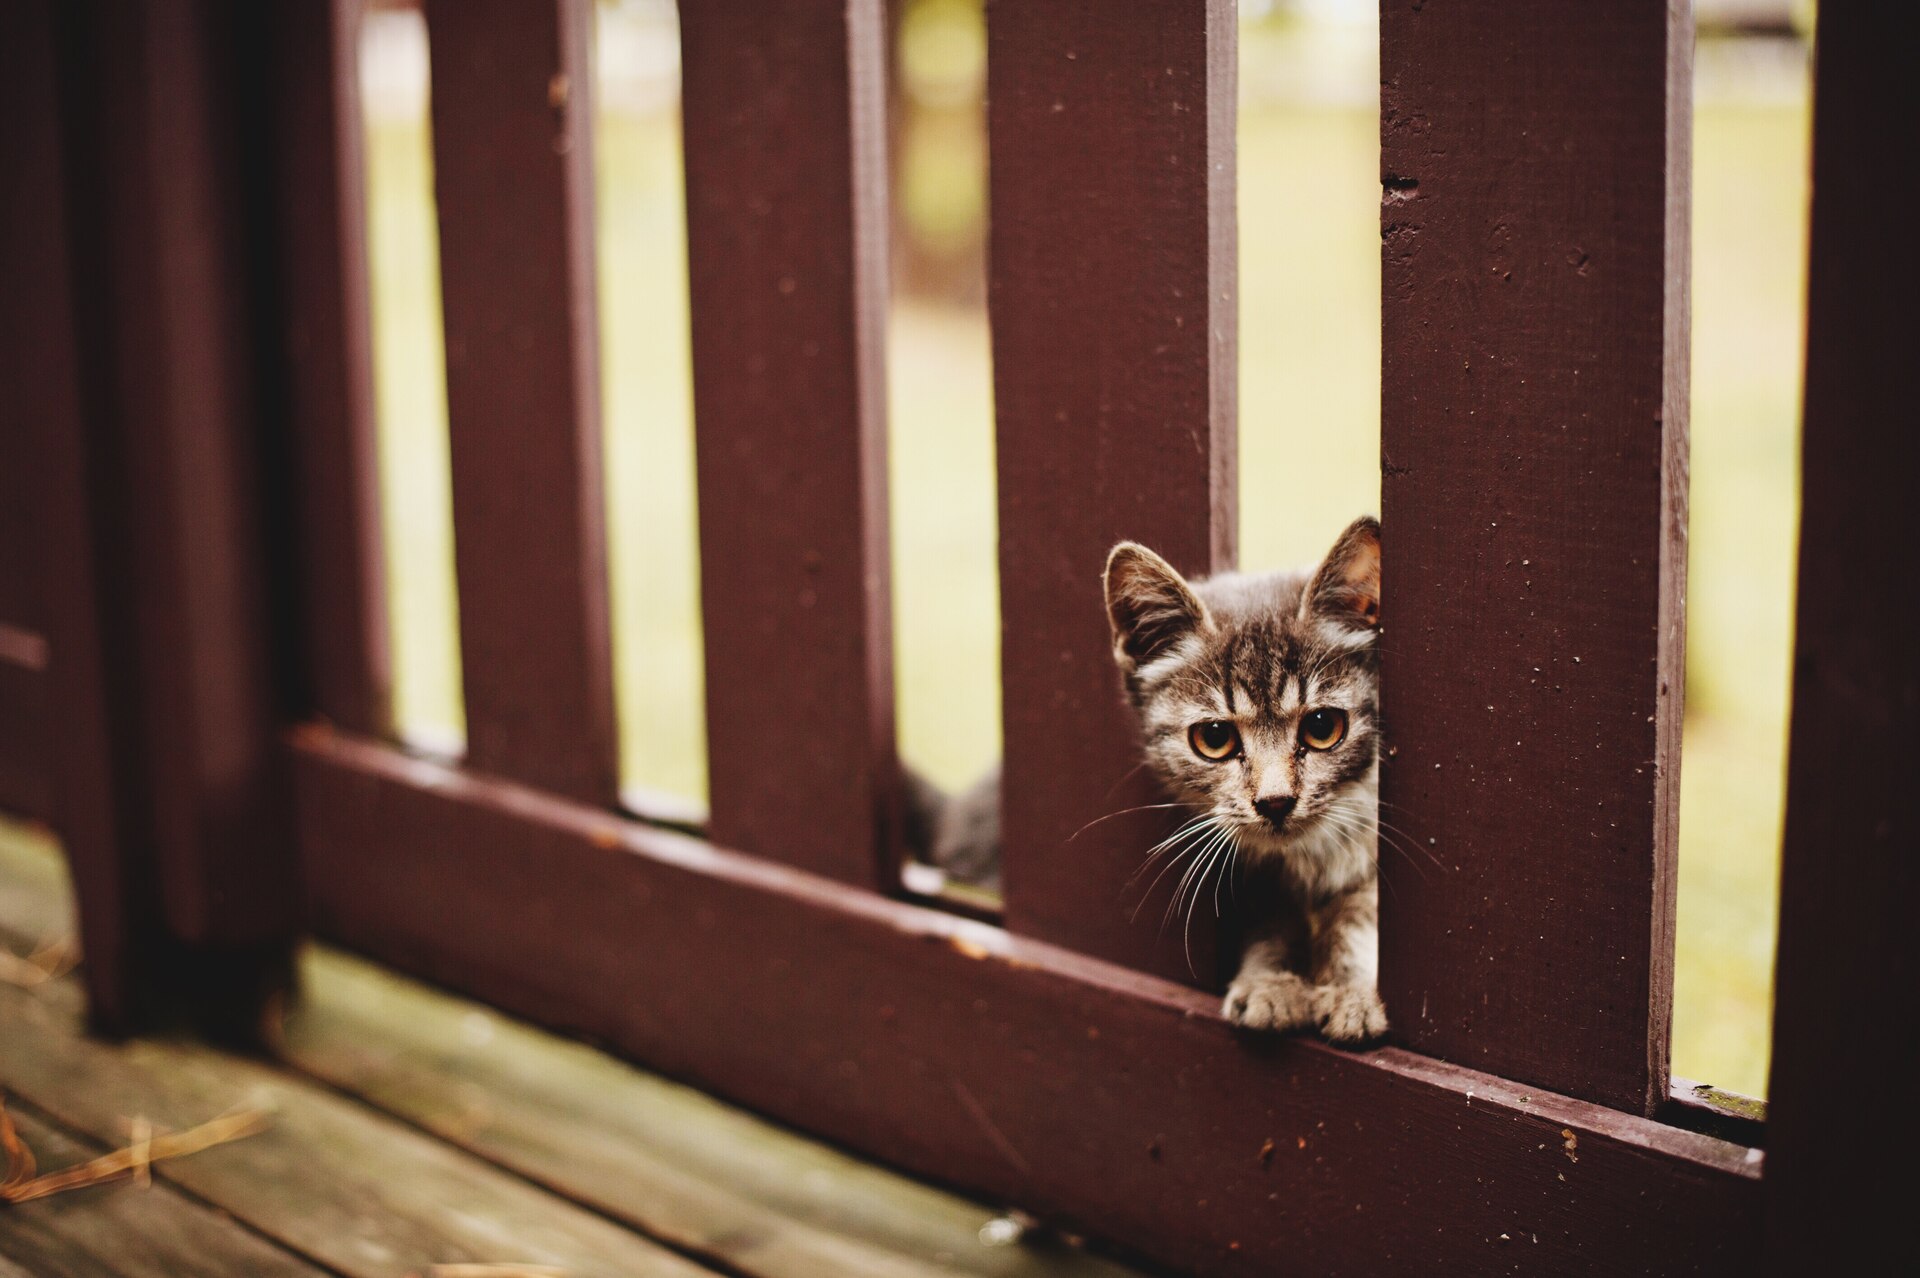 A cat sneaking out through a wooden fence